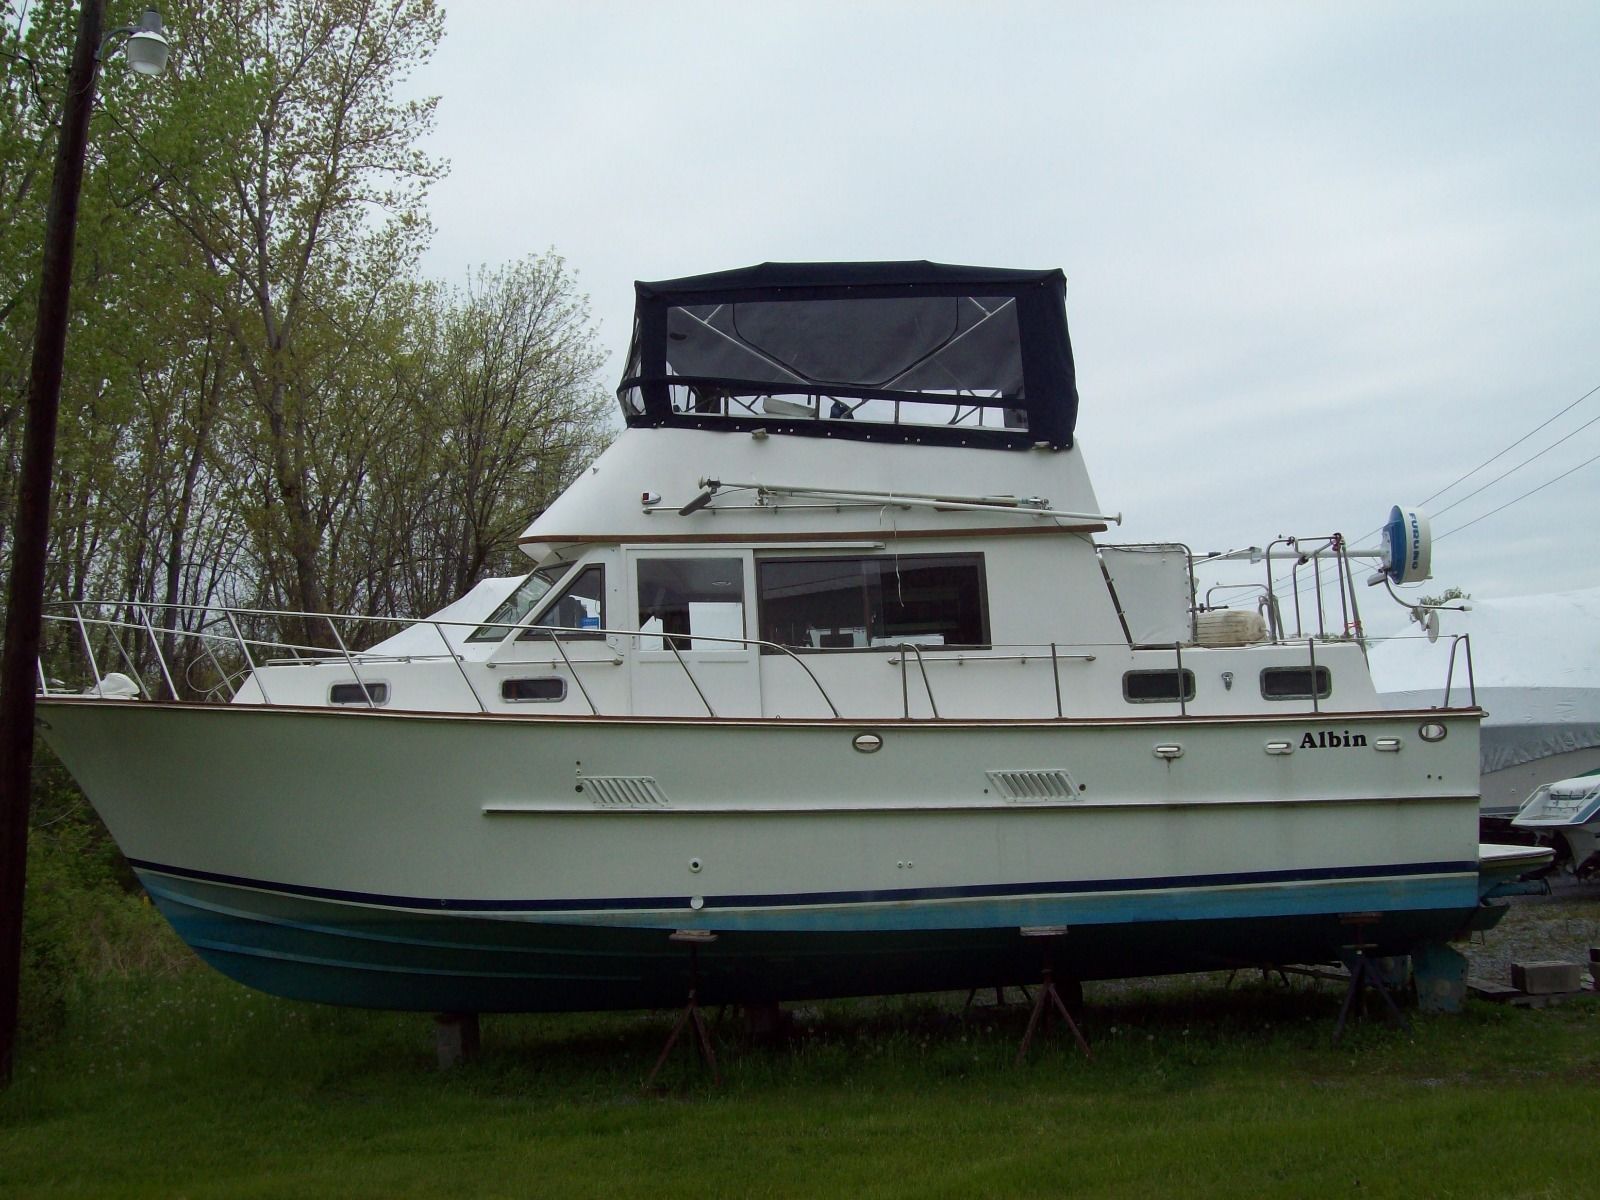 Albin Palm Beach 37 1985 for sale for $50,000 - Boats-from-USA.com